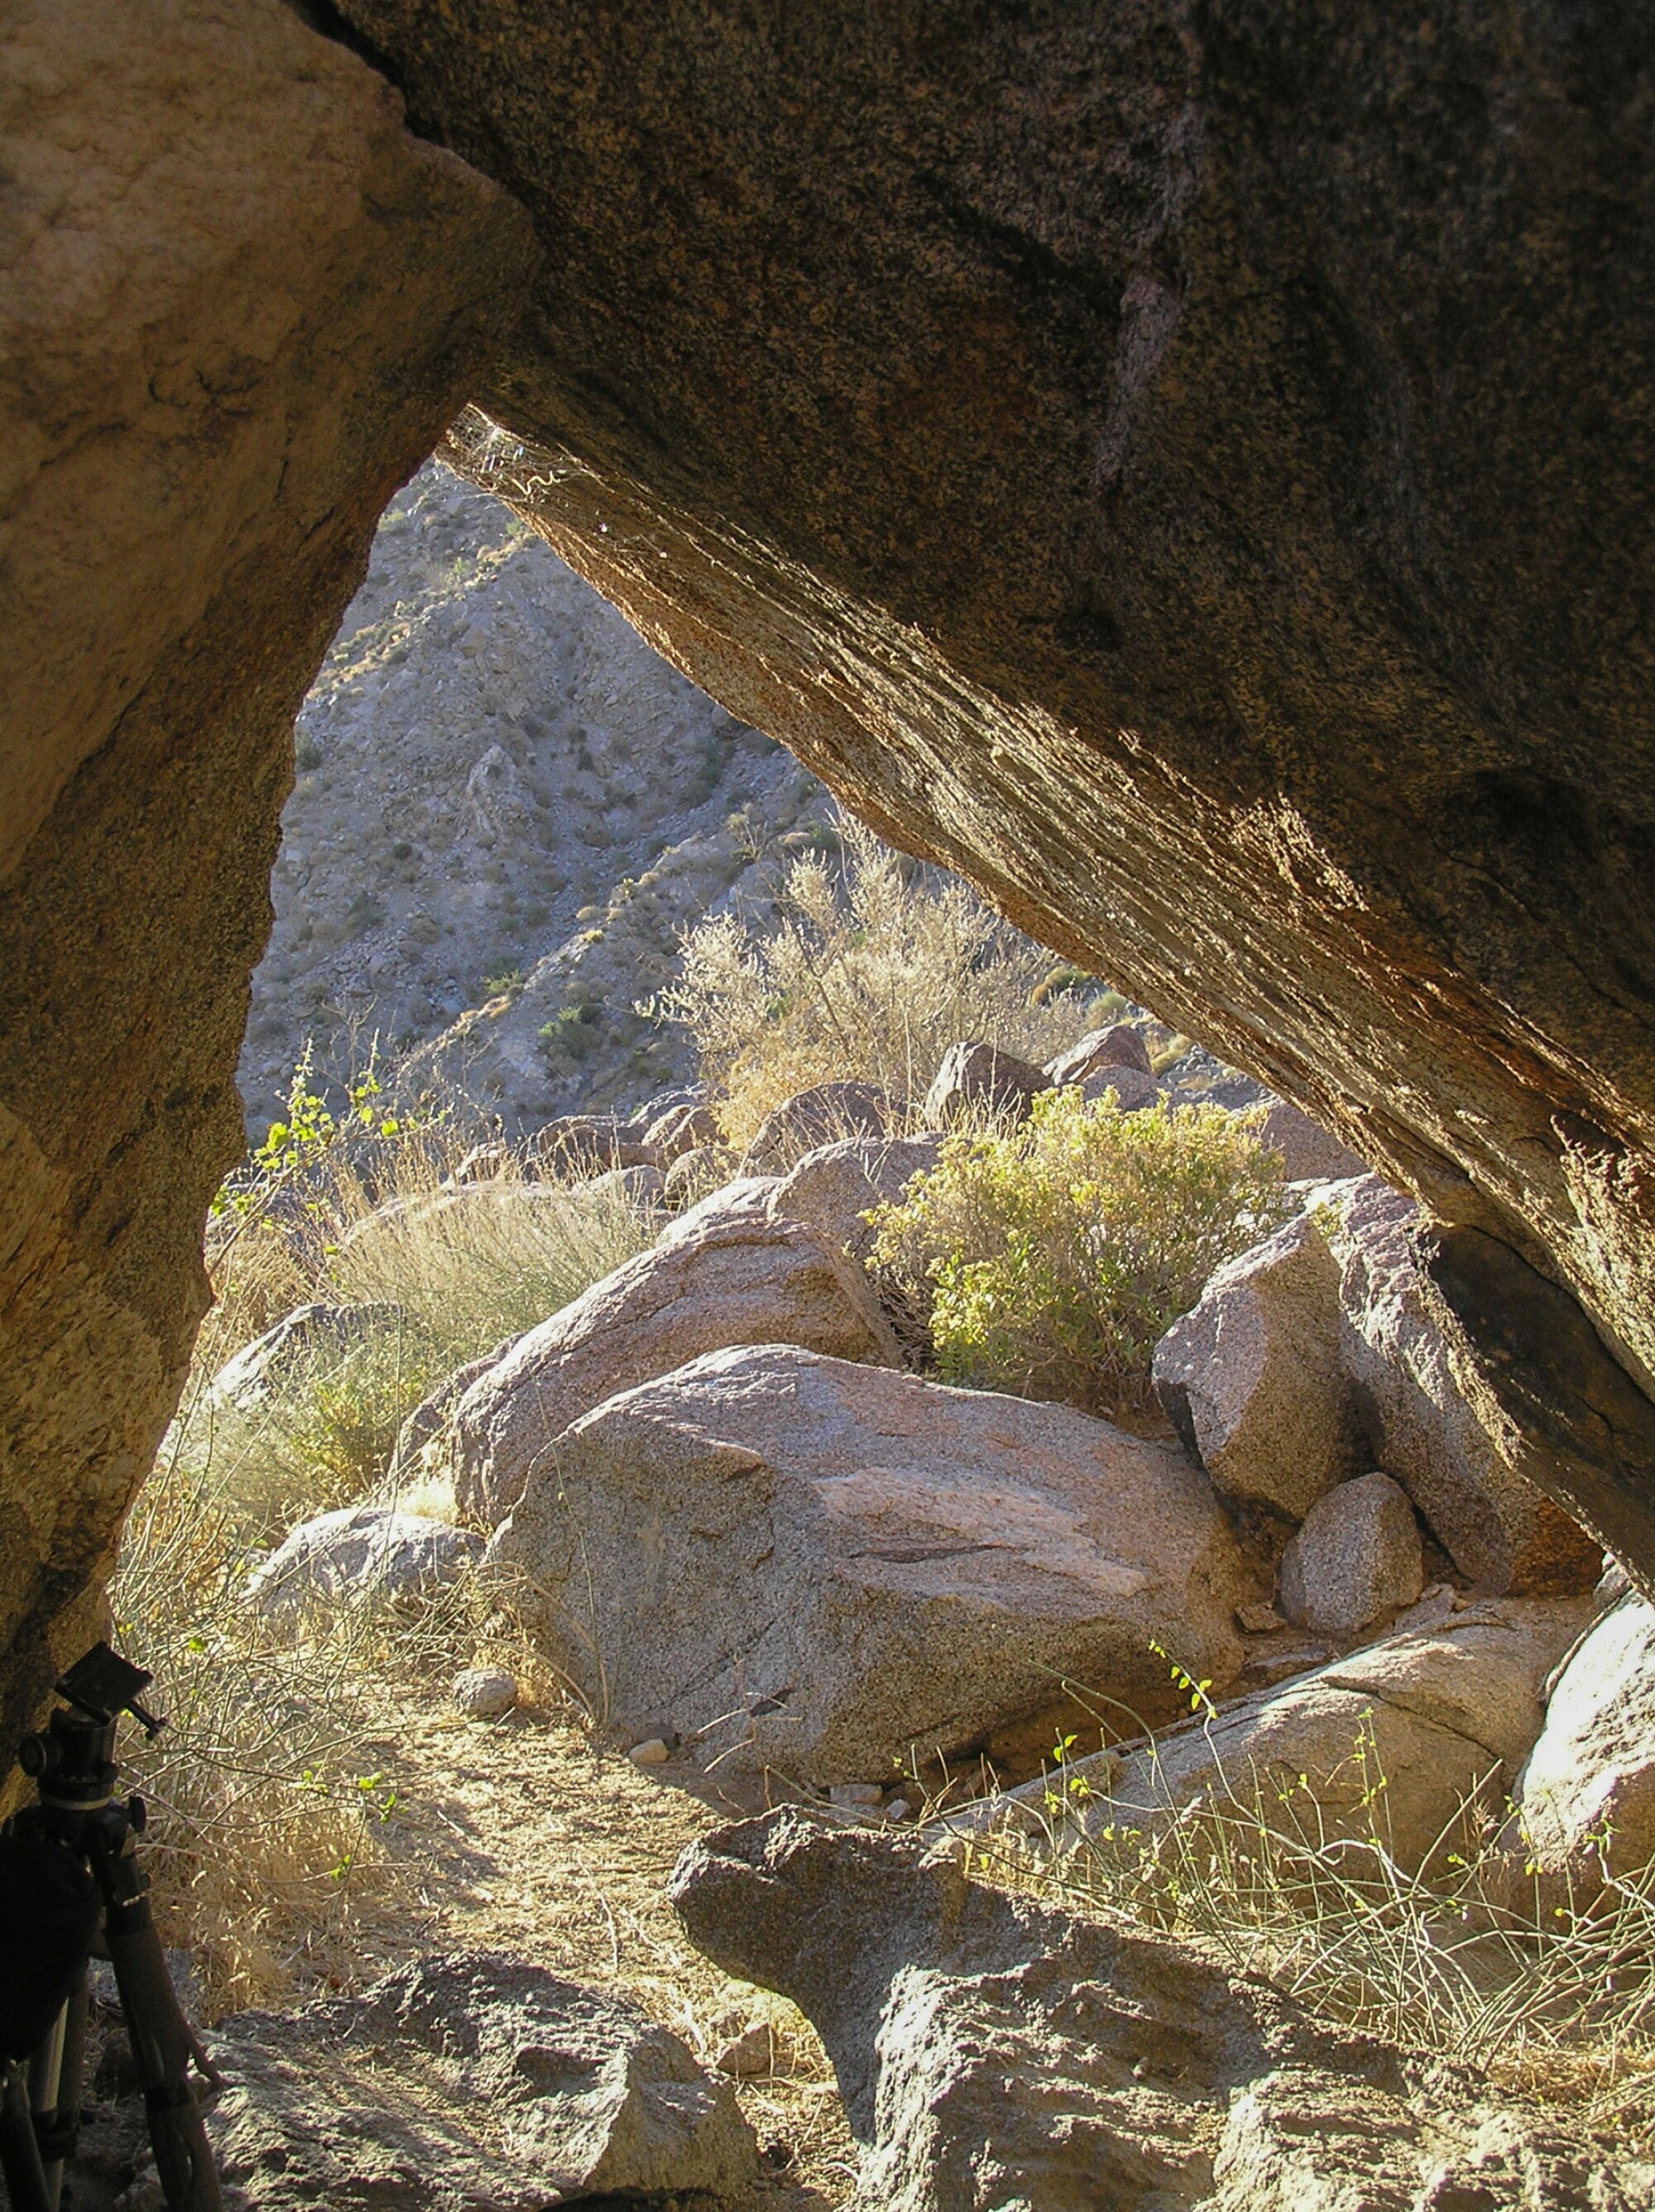 Rocks and foliage seen through an opening between rocks.